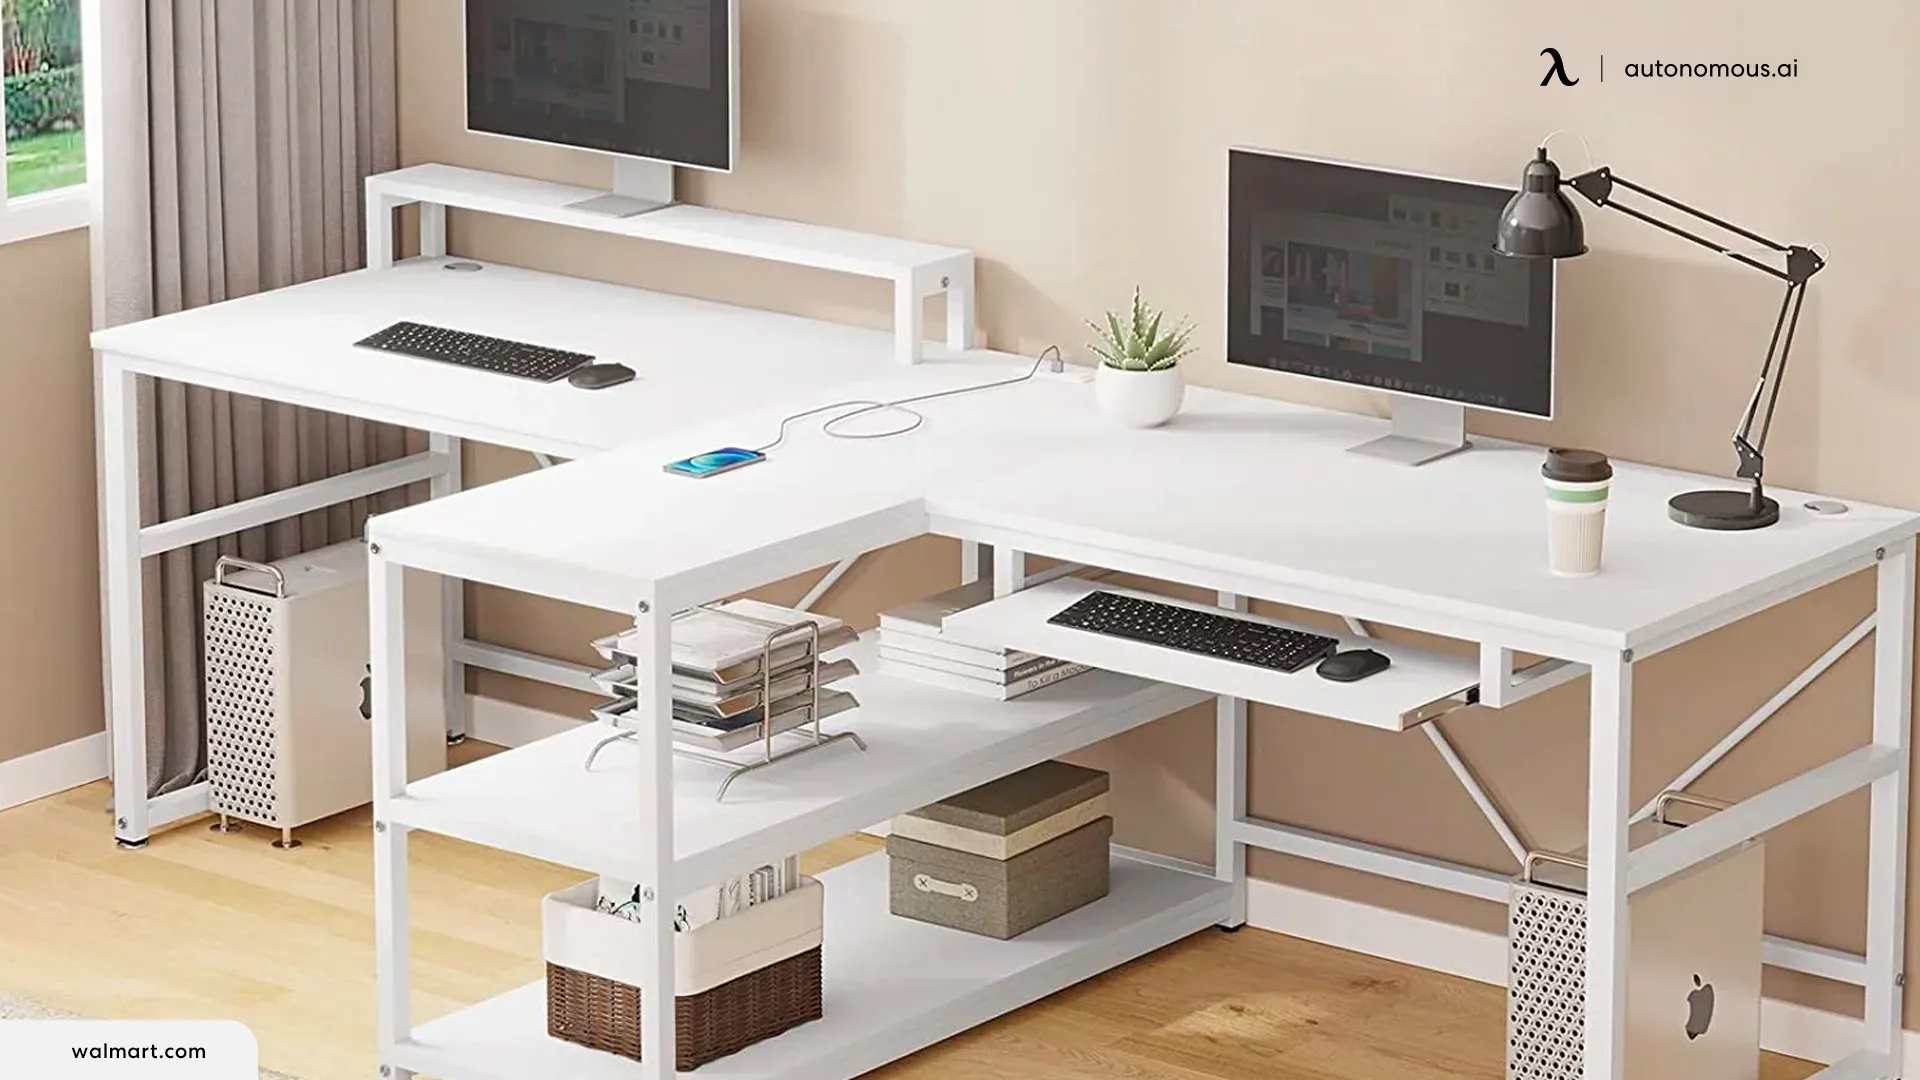 How to Set and Arrange a T-desk for Two People?